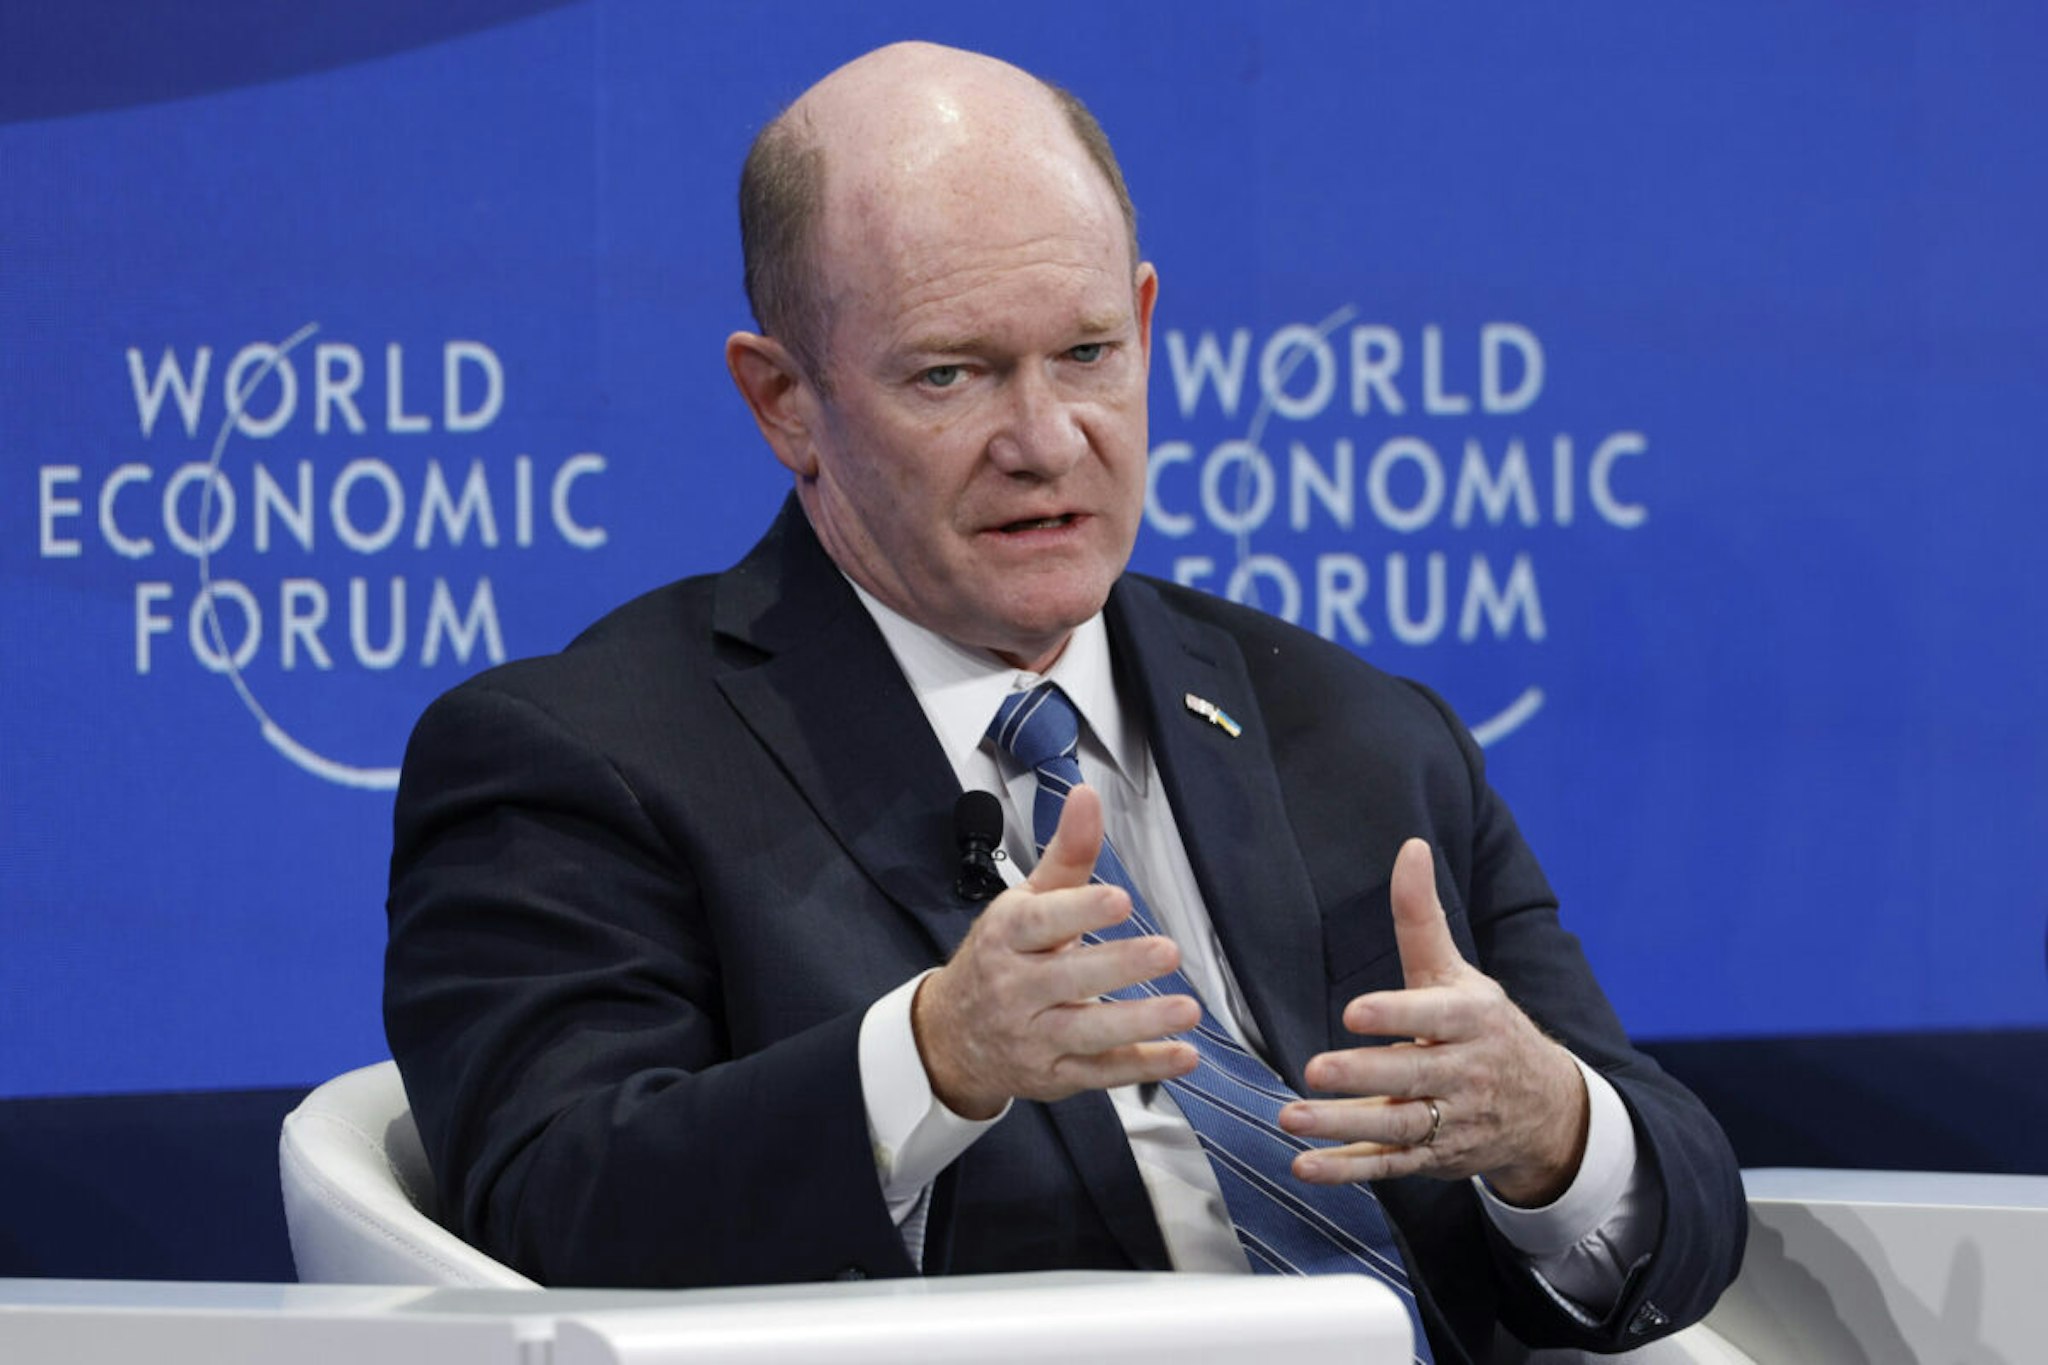 Senator Chris Coons, a Democrat from Delaware, during a panel session on the opening day of the World Economic Forum (WEF) in Davos, Switzerland, on Tuesday, Jan. 16, 2024. The annual Davos gathering of political leaders, top executives and celebrities runs from January 15 to 19.